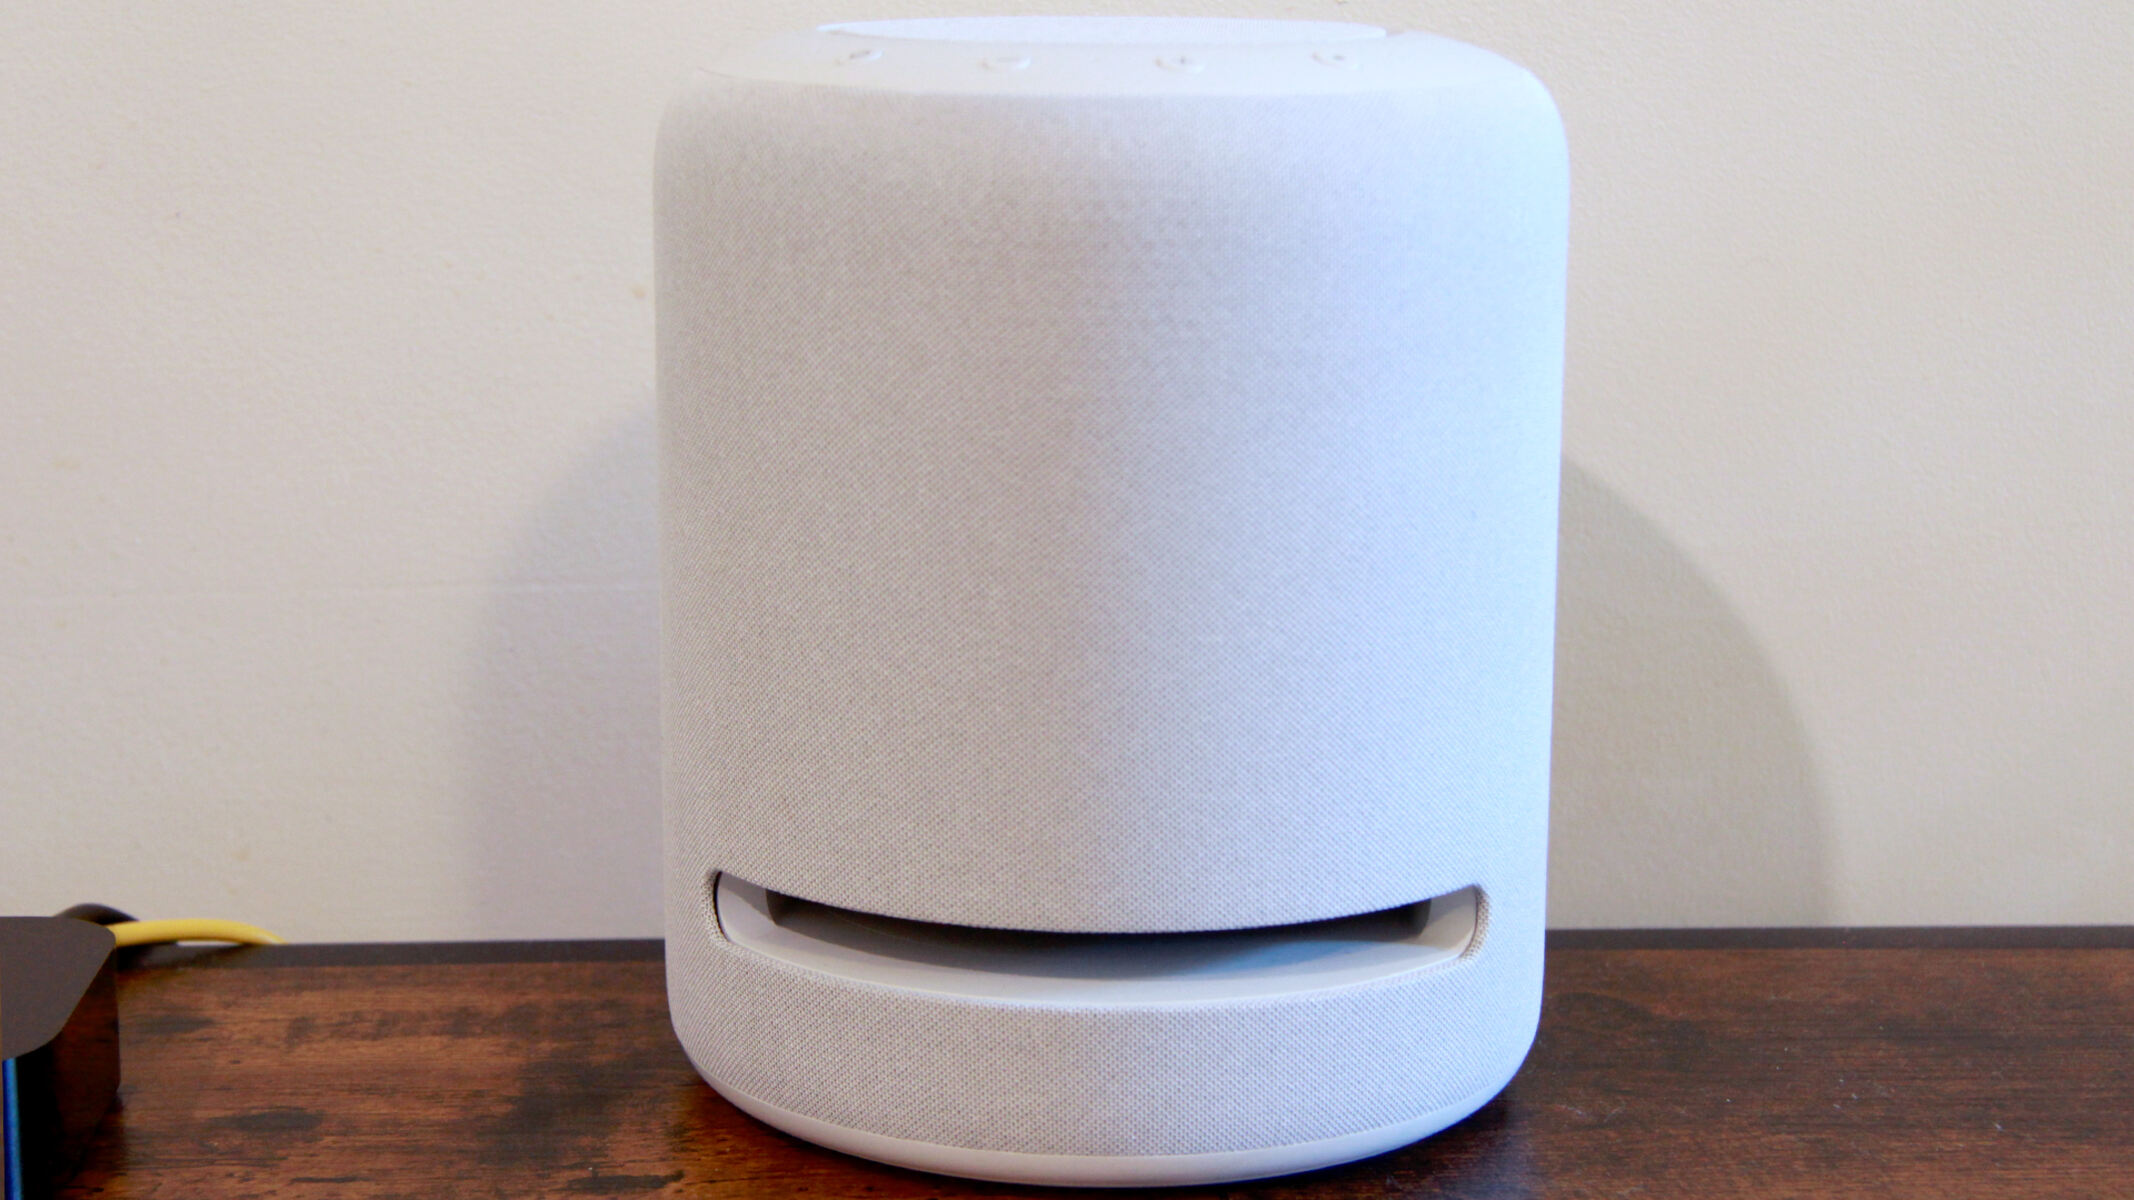 How To Turn Any Speaker Into A Smart Speaker